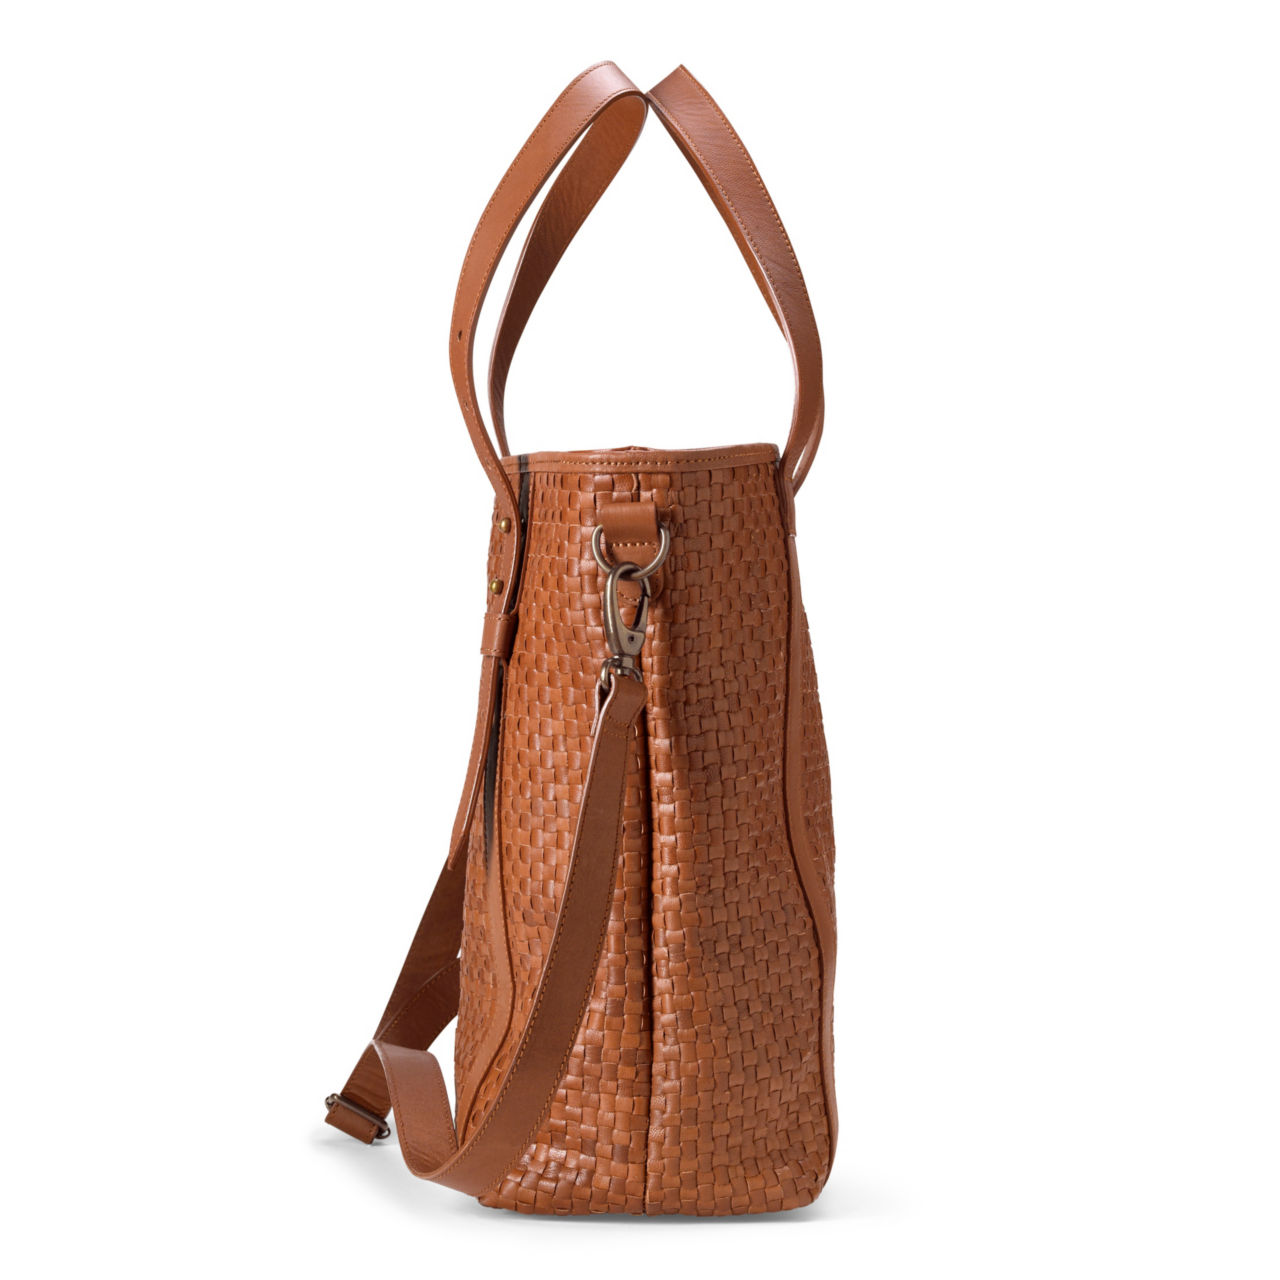 Saddle Ridge Woven Leather Tote - COGNAC image number 1